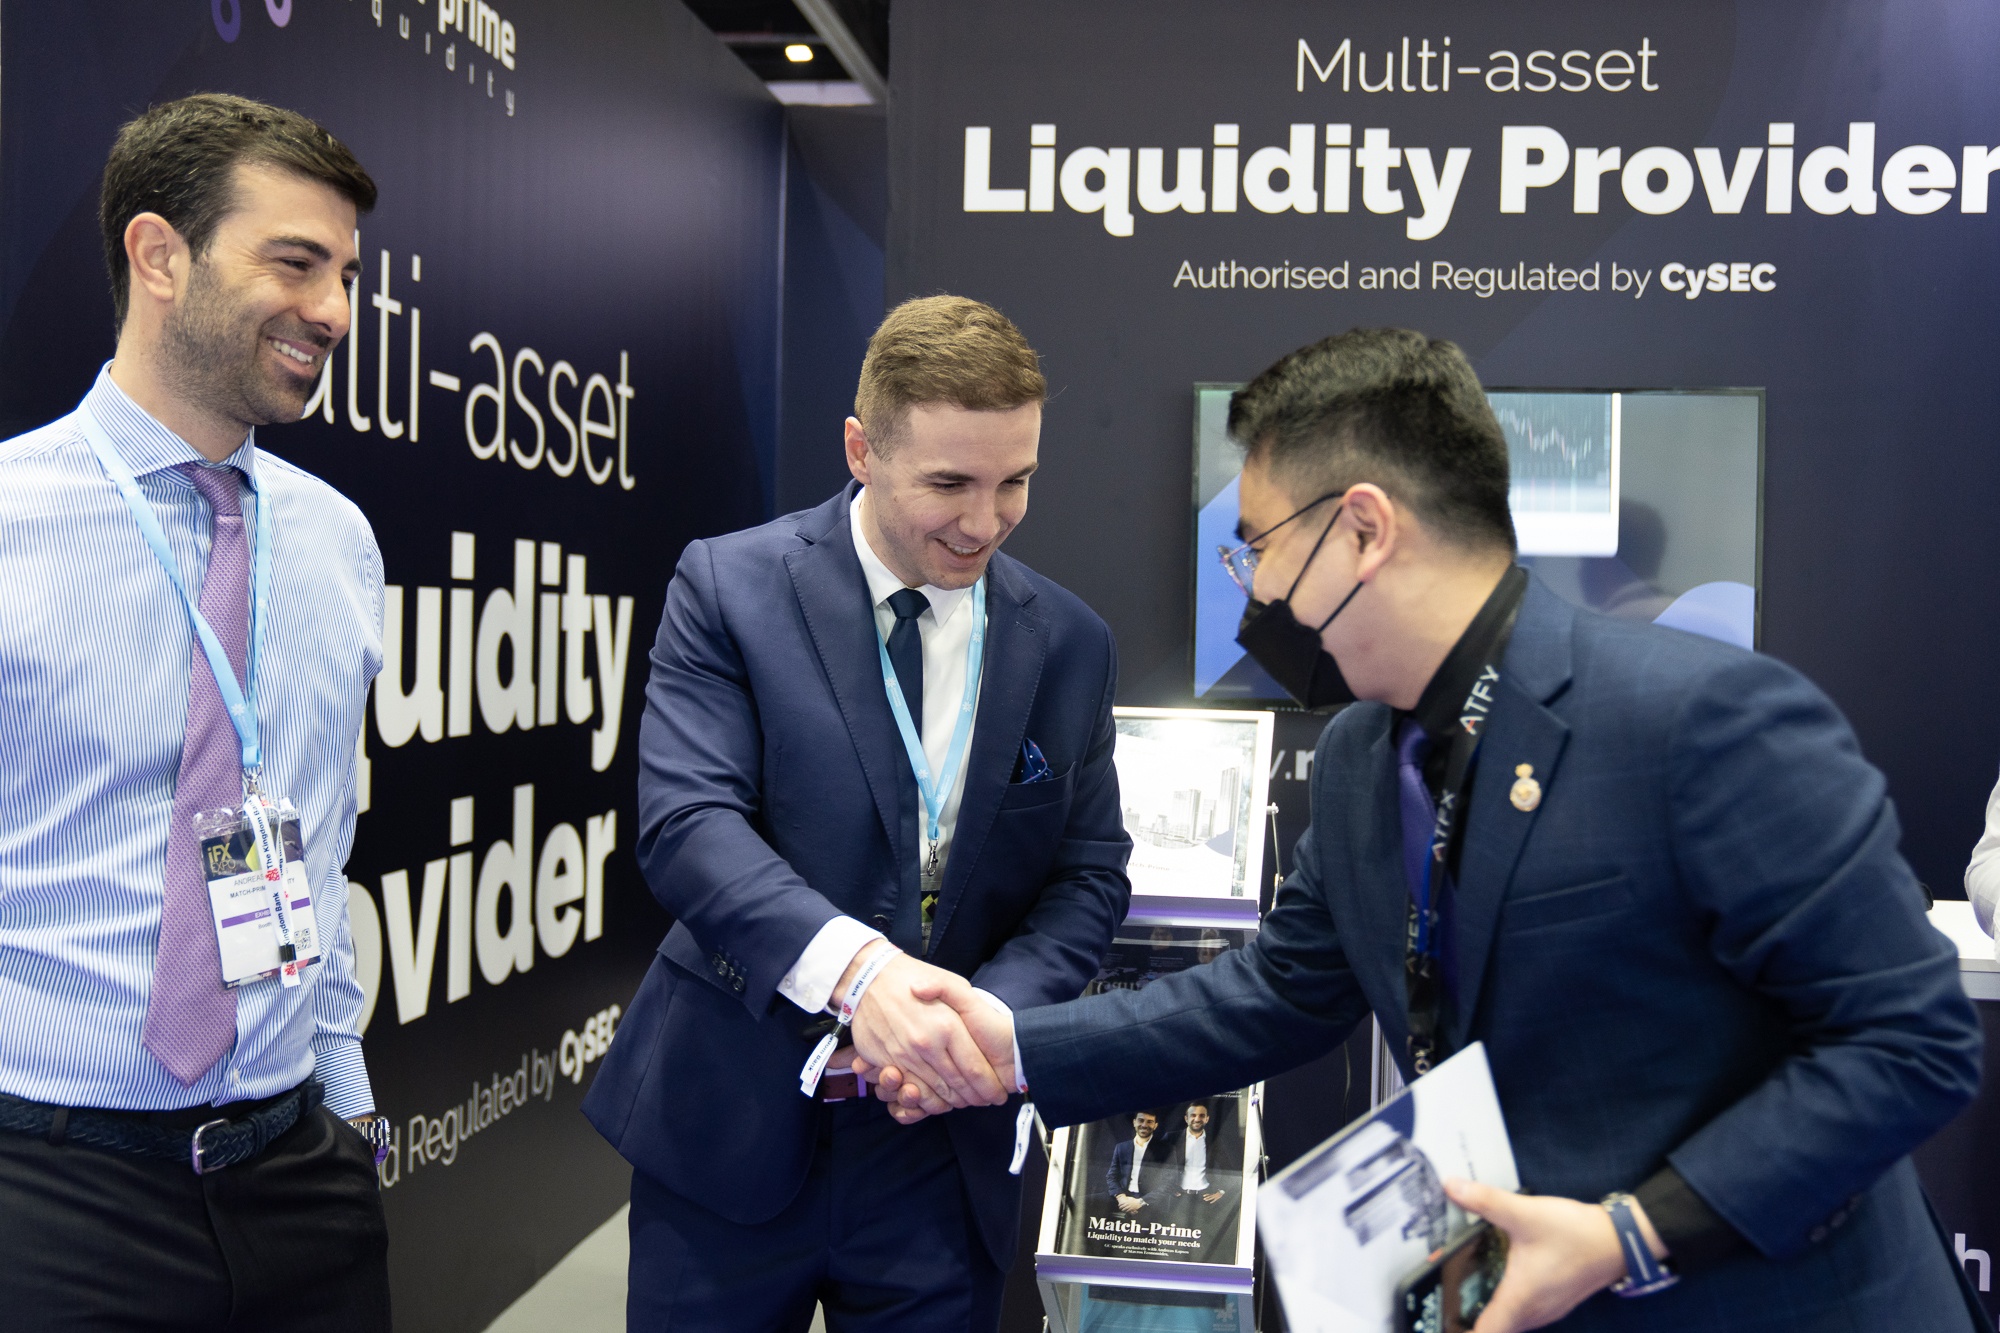 Match-Prime, a New Liquidity Provider Licensed by CySEC Operated by MTG Liquidity Limited